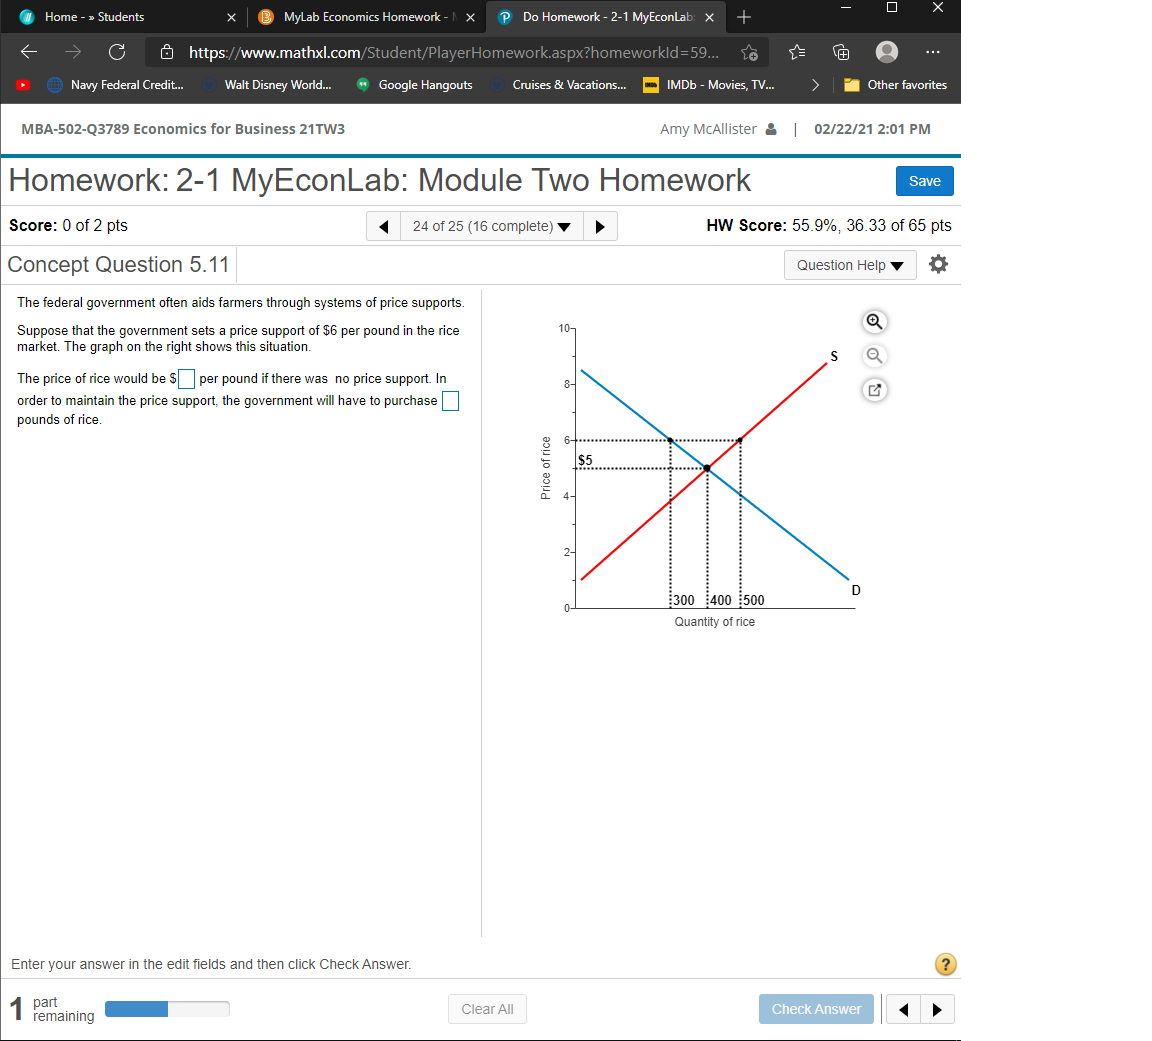 Home - » Students
MyLab Economics Homework -
P Do Homework - 2-1 MyEconLab: x
+
Ô https://www.mathxl.com/Student/PlayerHomework.aspx?homeworkld=59...
...
Navy Federal Credit.
Walt Disney World...
* Google Hangouts
>
Other favorites
Cruises & Vacations..
IMDB - Movies, TV.
MBA-502-Q3789 Economics for Business 21TW3
Amy MCAllister & 02/22/21 2:01 PM
Homework: 2-1 MyEconLab: Module Two Homework
Save
Score: 0 of 2 pts
24 of 25 (16 complete)
HW Score: 55.9%, 36.33 of 65 pts
Concept Question 5.11
Question Help
The federal government often aids farmers through systems of price supports.
10-
Suppose that the government sets a price support of $6 per pound in the rice
market. The graph on the right shows this situation.
S
The price of rice would be $ per pound if there was no price support. In
8-
order to maintain the price support, the government will have to purchase
pounds of rice.
$5
2-
D
300 400 500
0-
Quantity of rice
Enter your answer in the edit fields and then click Check Answer.
?
part
remaining
Clear All
Check Answer
Price of rice
